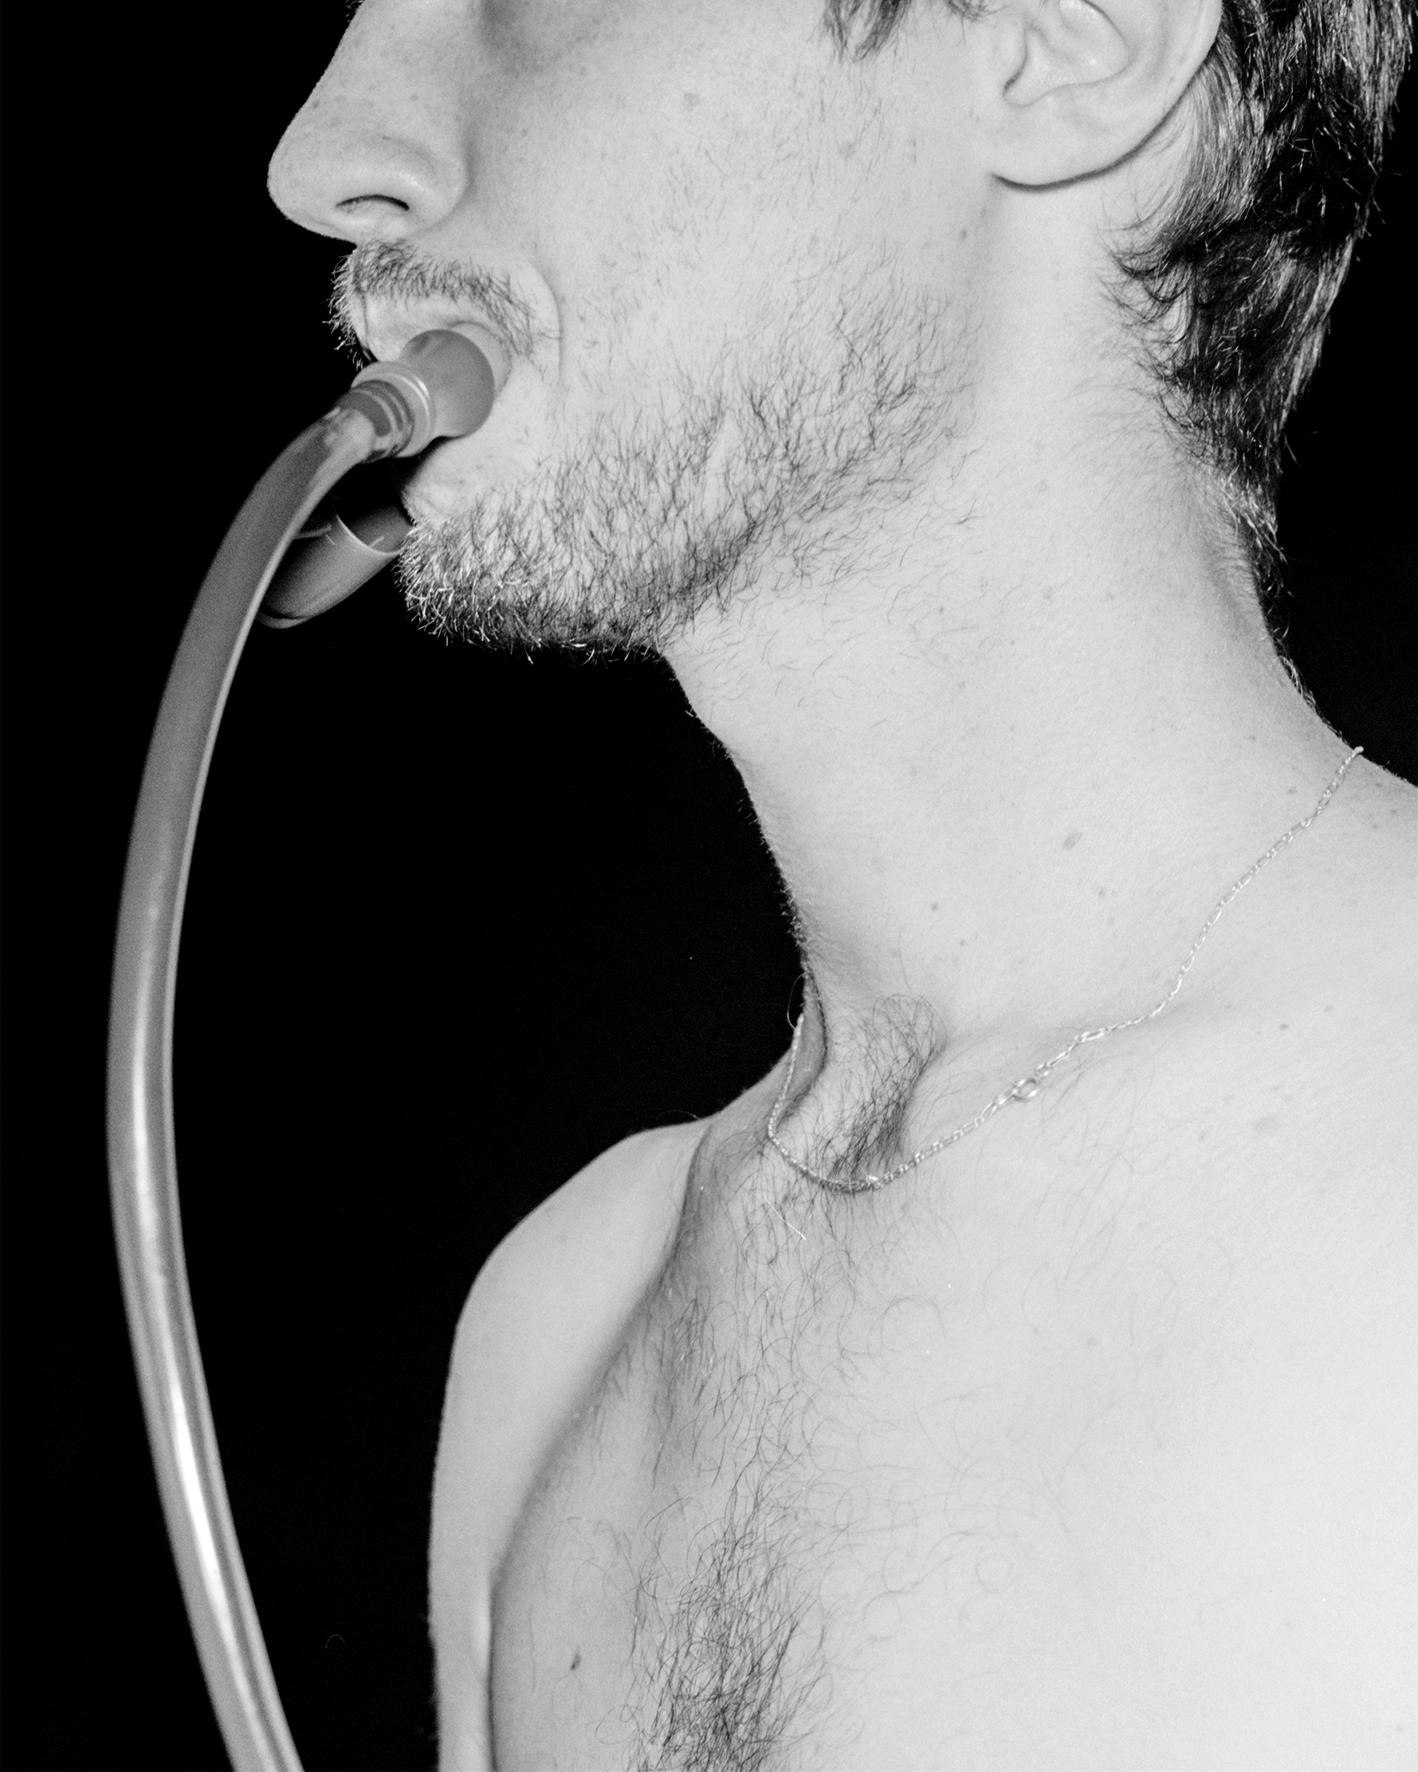 A black and white photograph of the chest, neck and jaw of a light-skinned man drinking from the hose of a hydration flask.